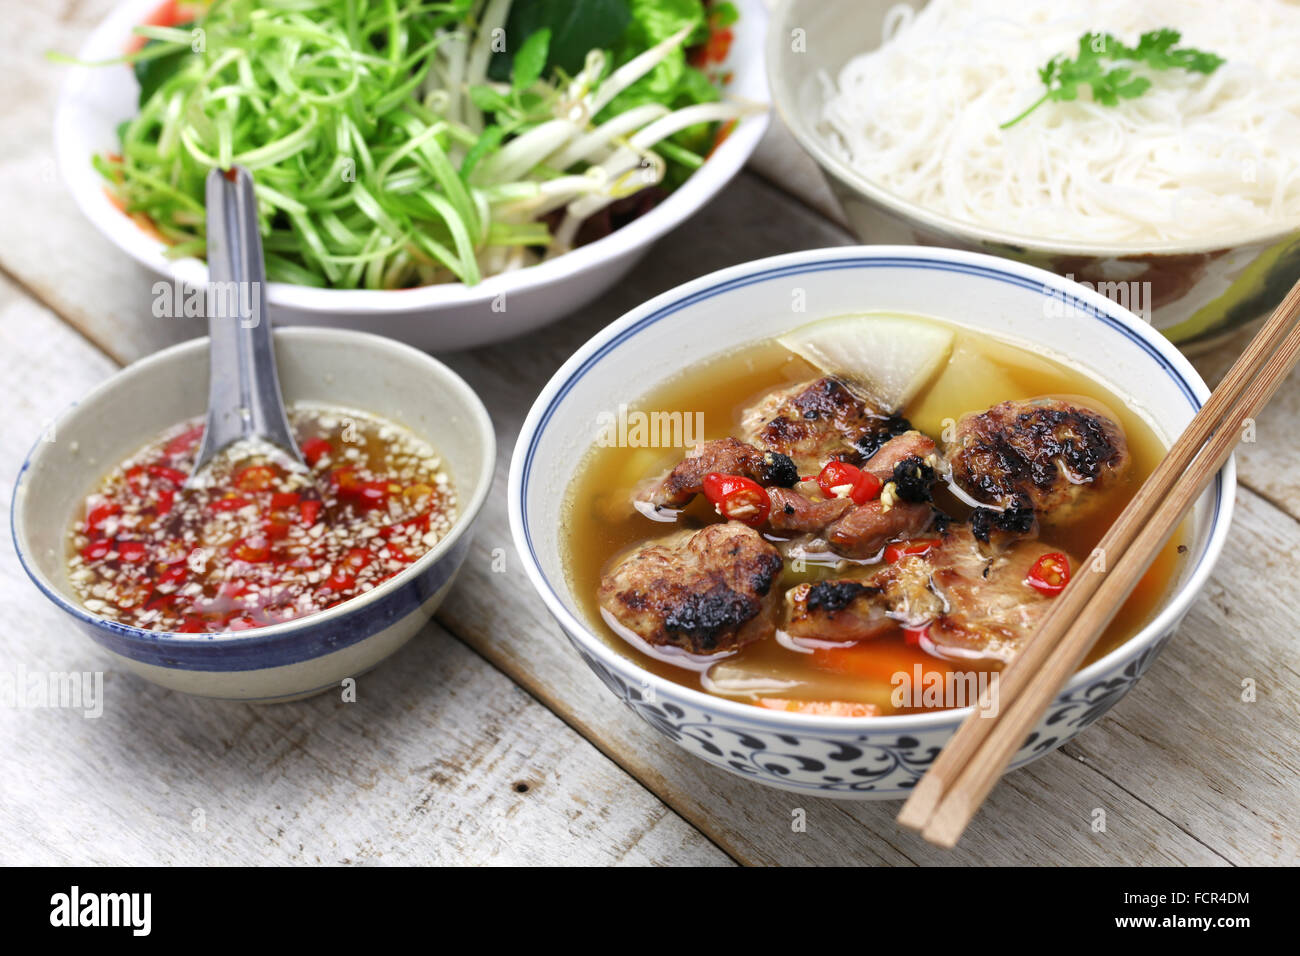 bun cha, grilled pork rice noodles and herbs, vietnamese cuisine Stock Photo